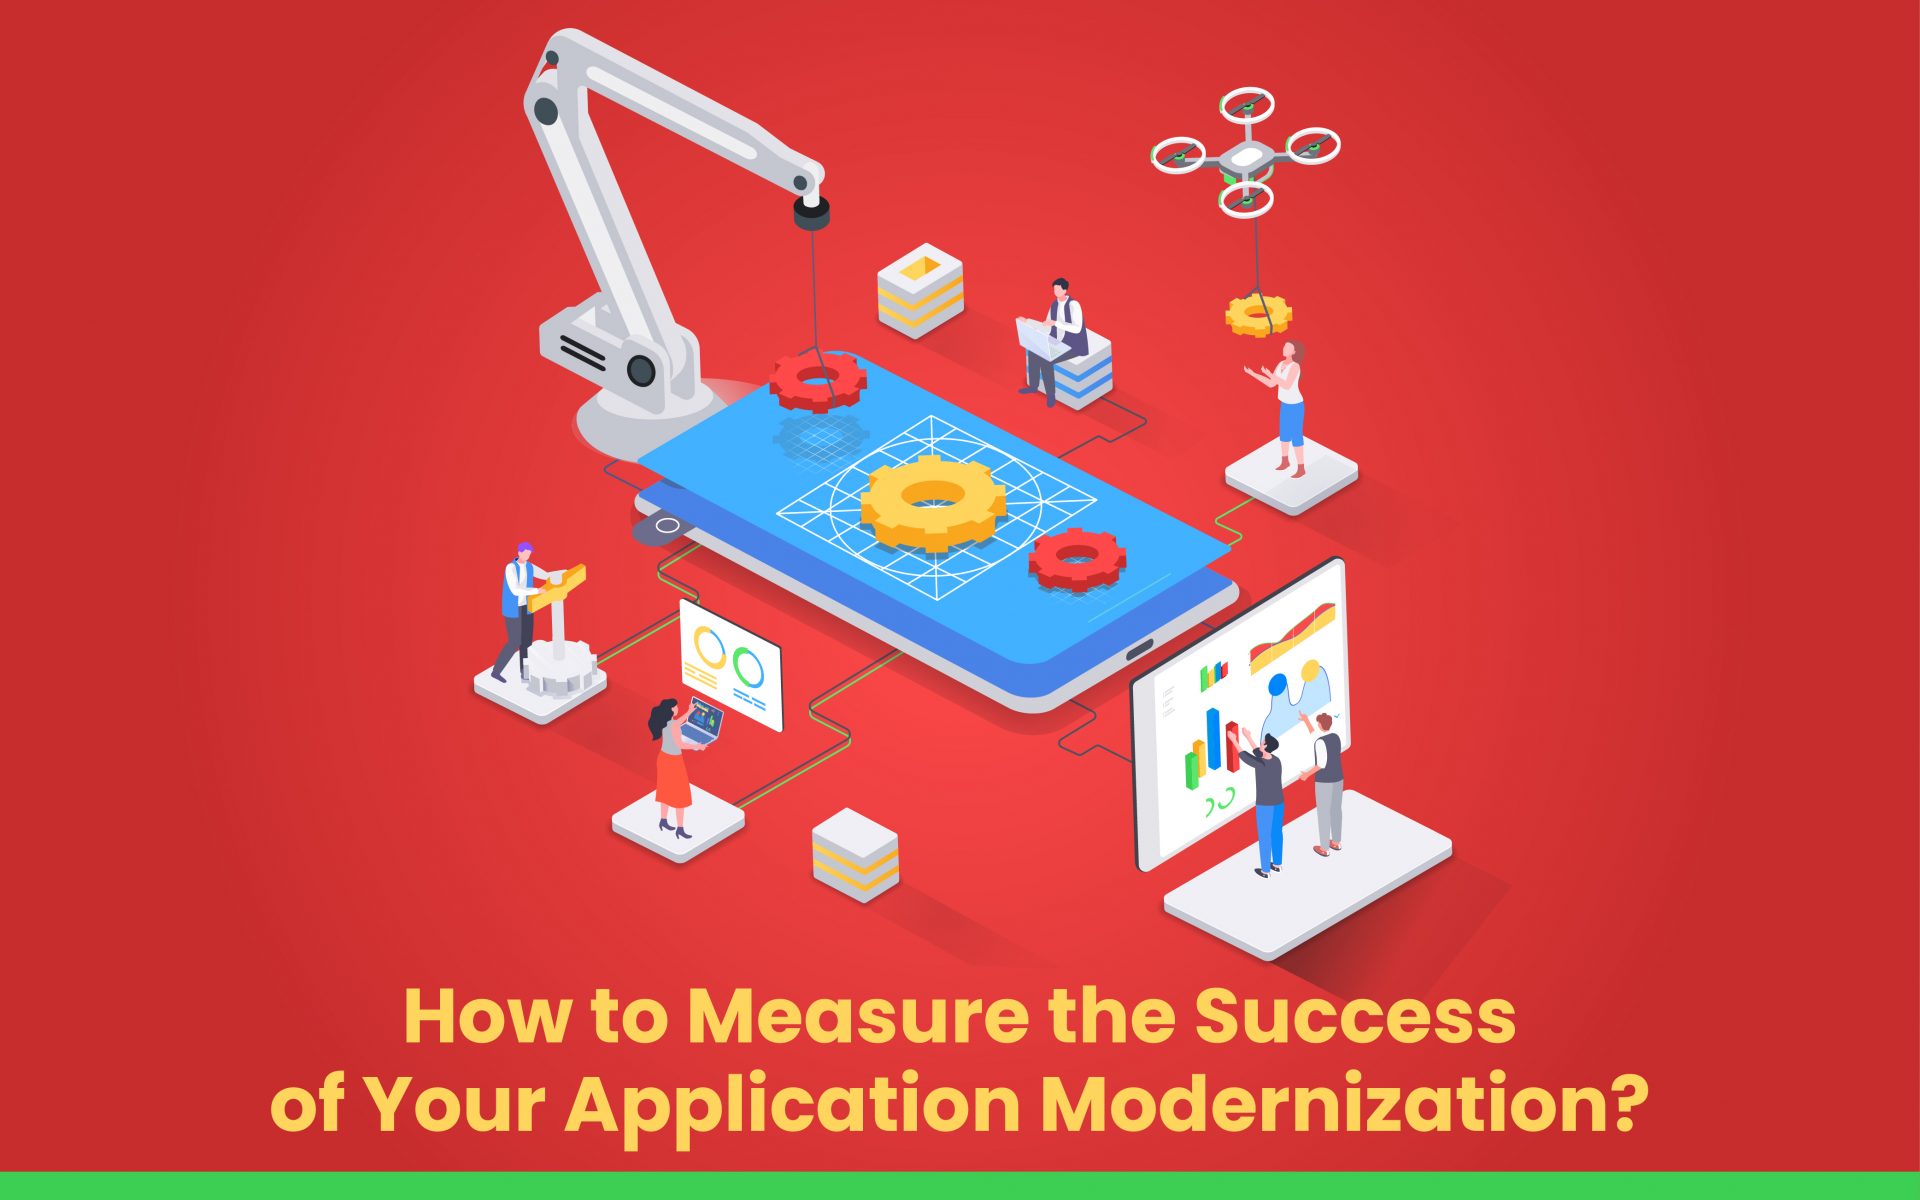 How to Measure the Success of Your Application Modernization?